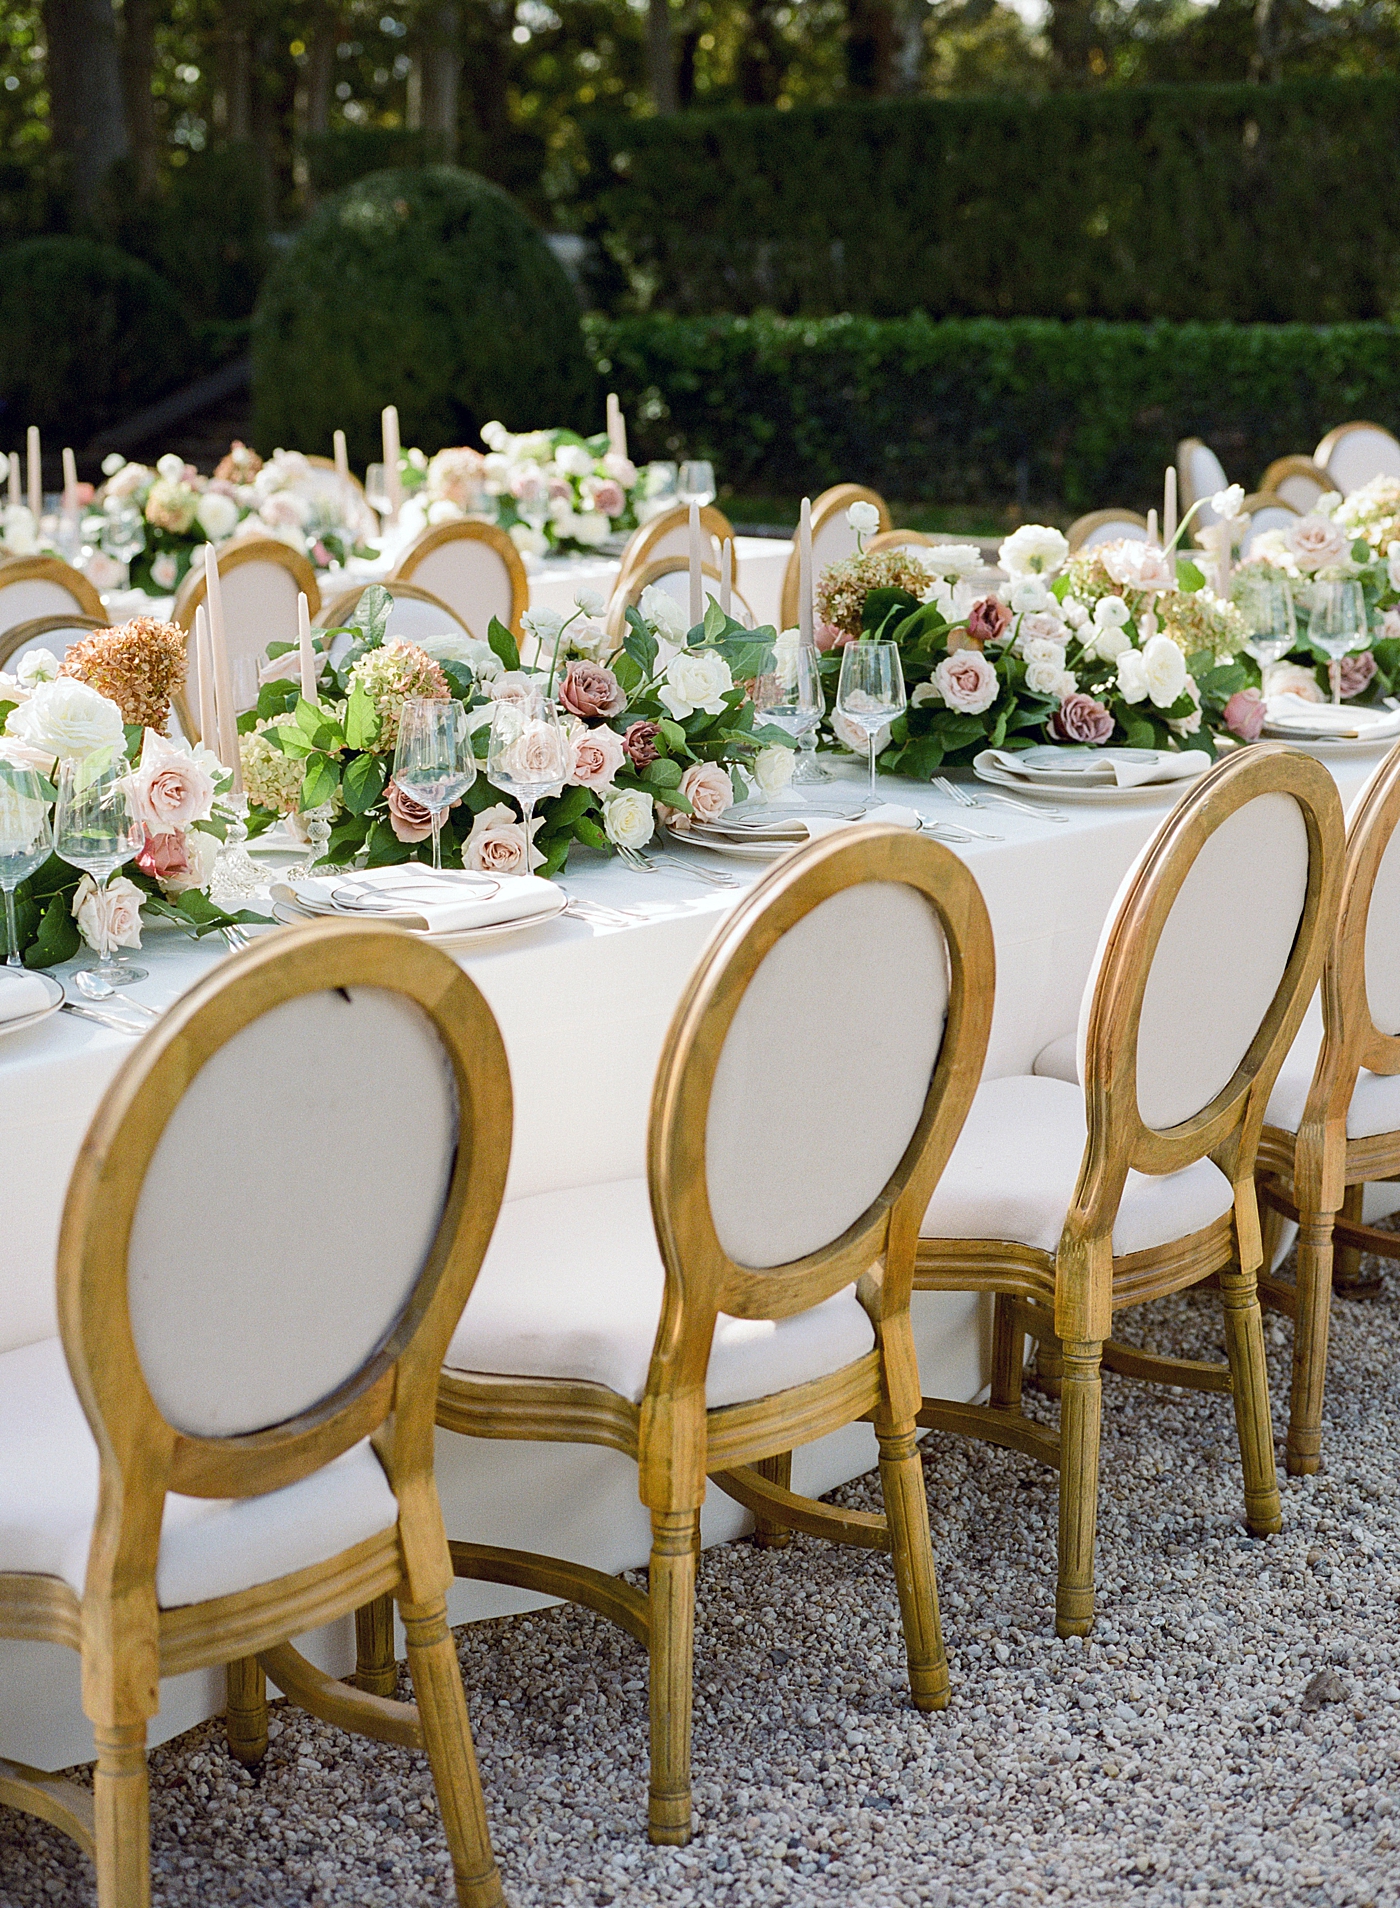 Details of a table setting with white flowers and white table cloths in a European garden during Oheka castle wedding | Image by Hope Helmuth Photography